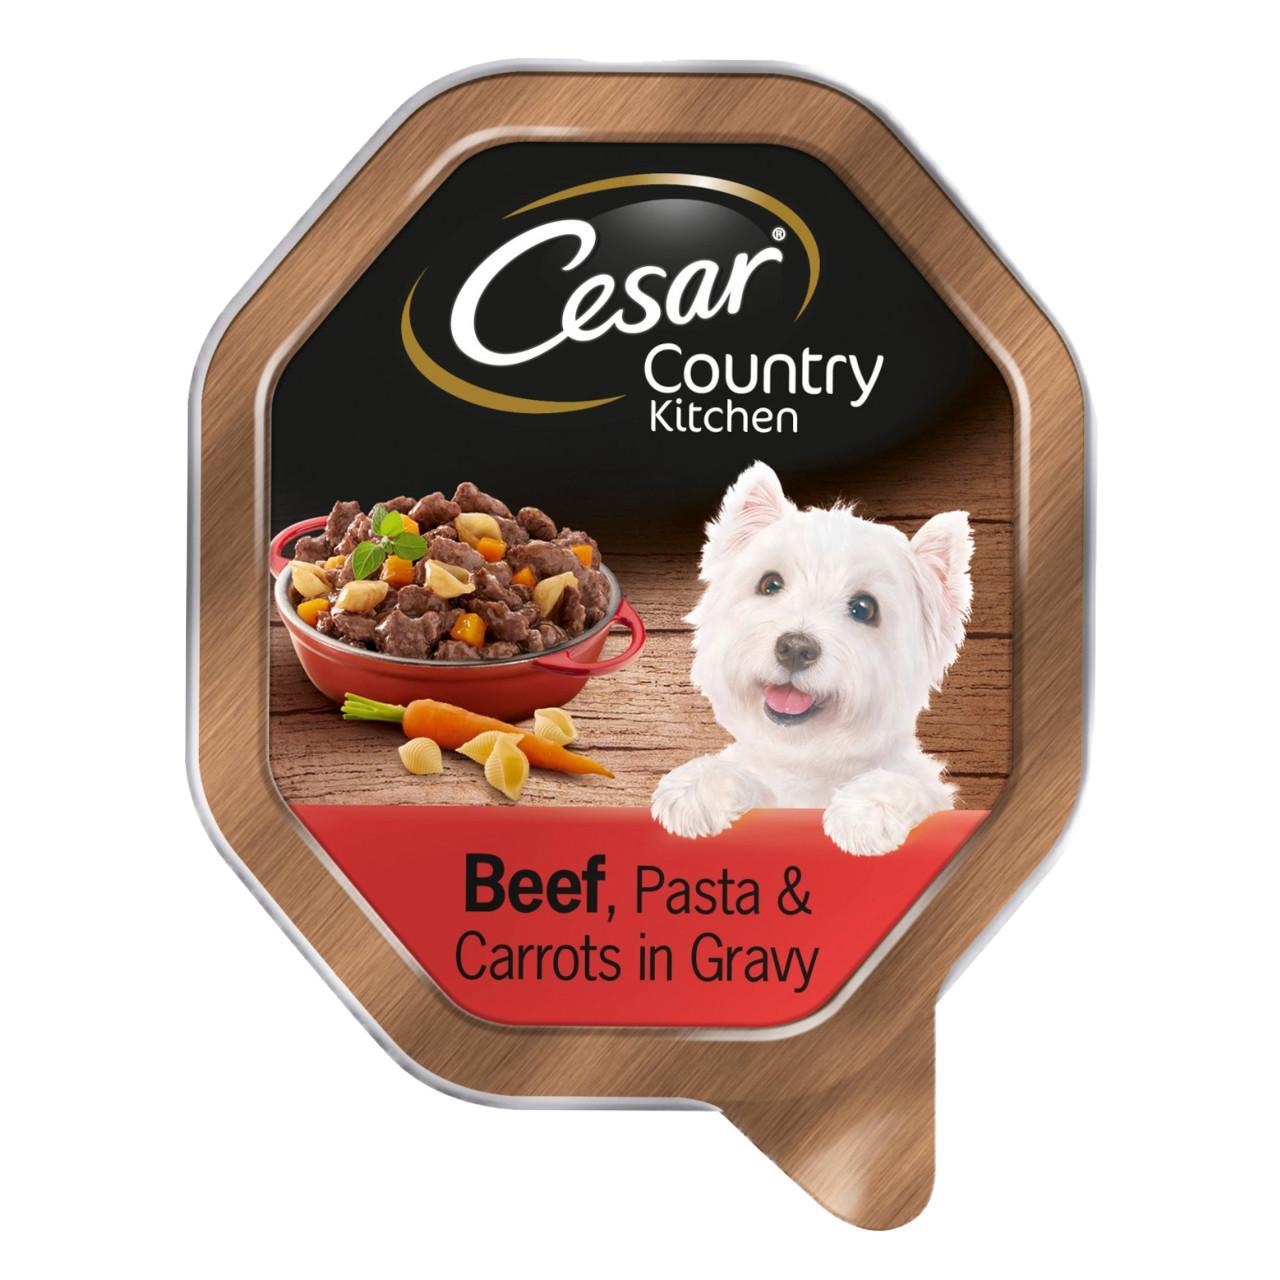 An image of Cesar Country Kitchen Beef & Pasta in Gravy